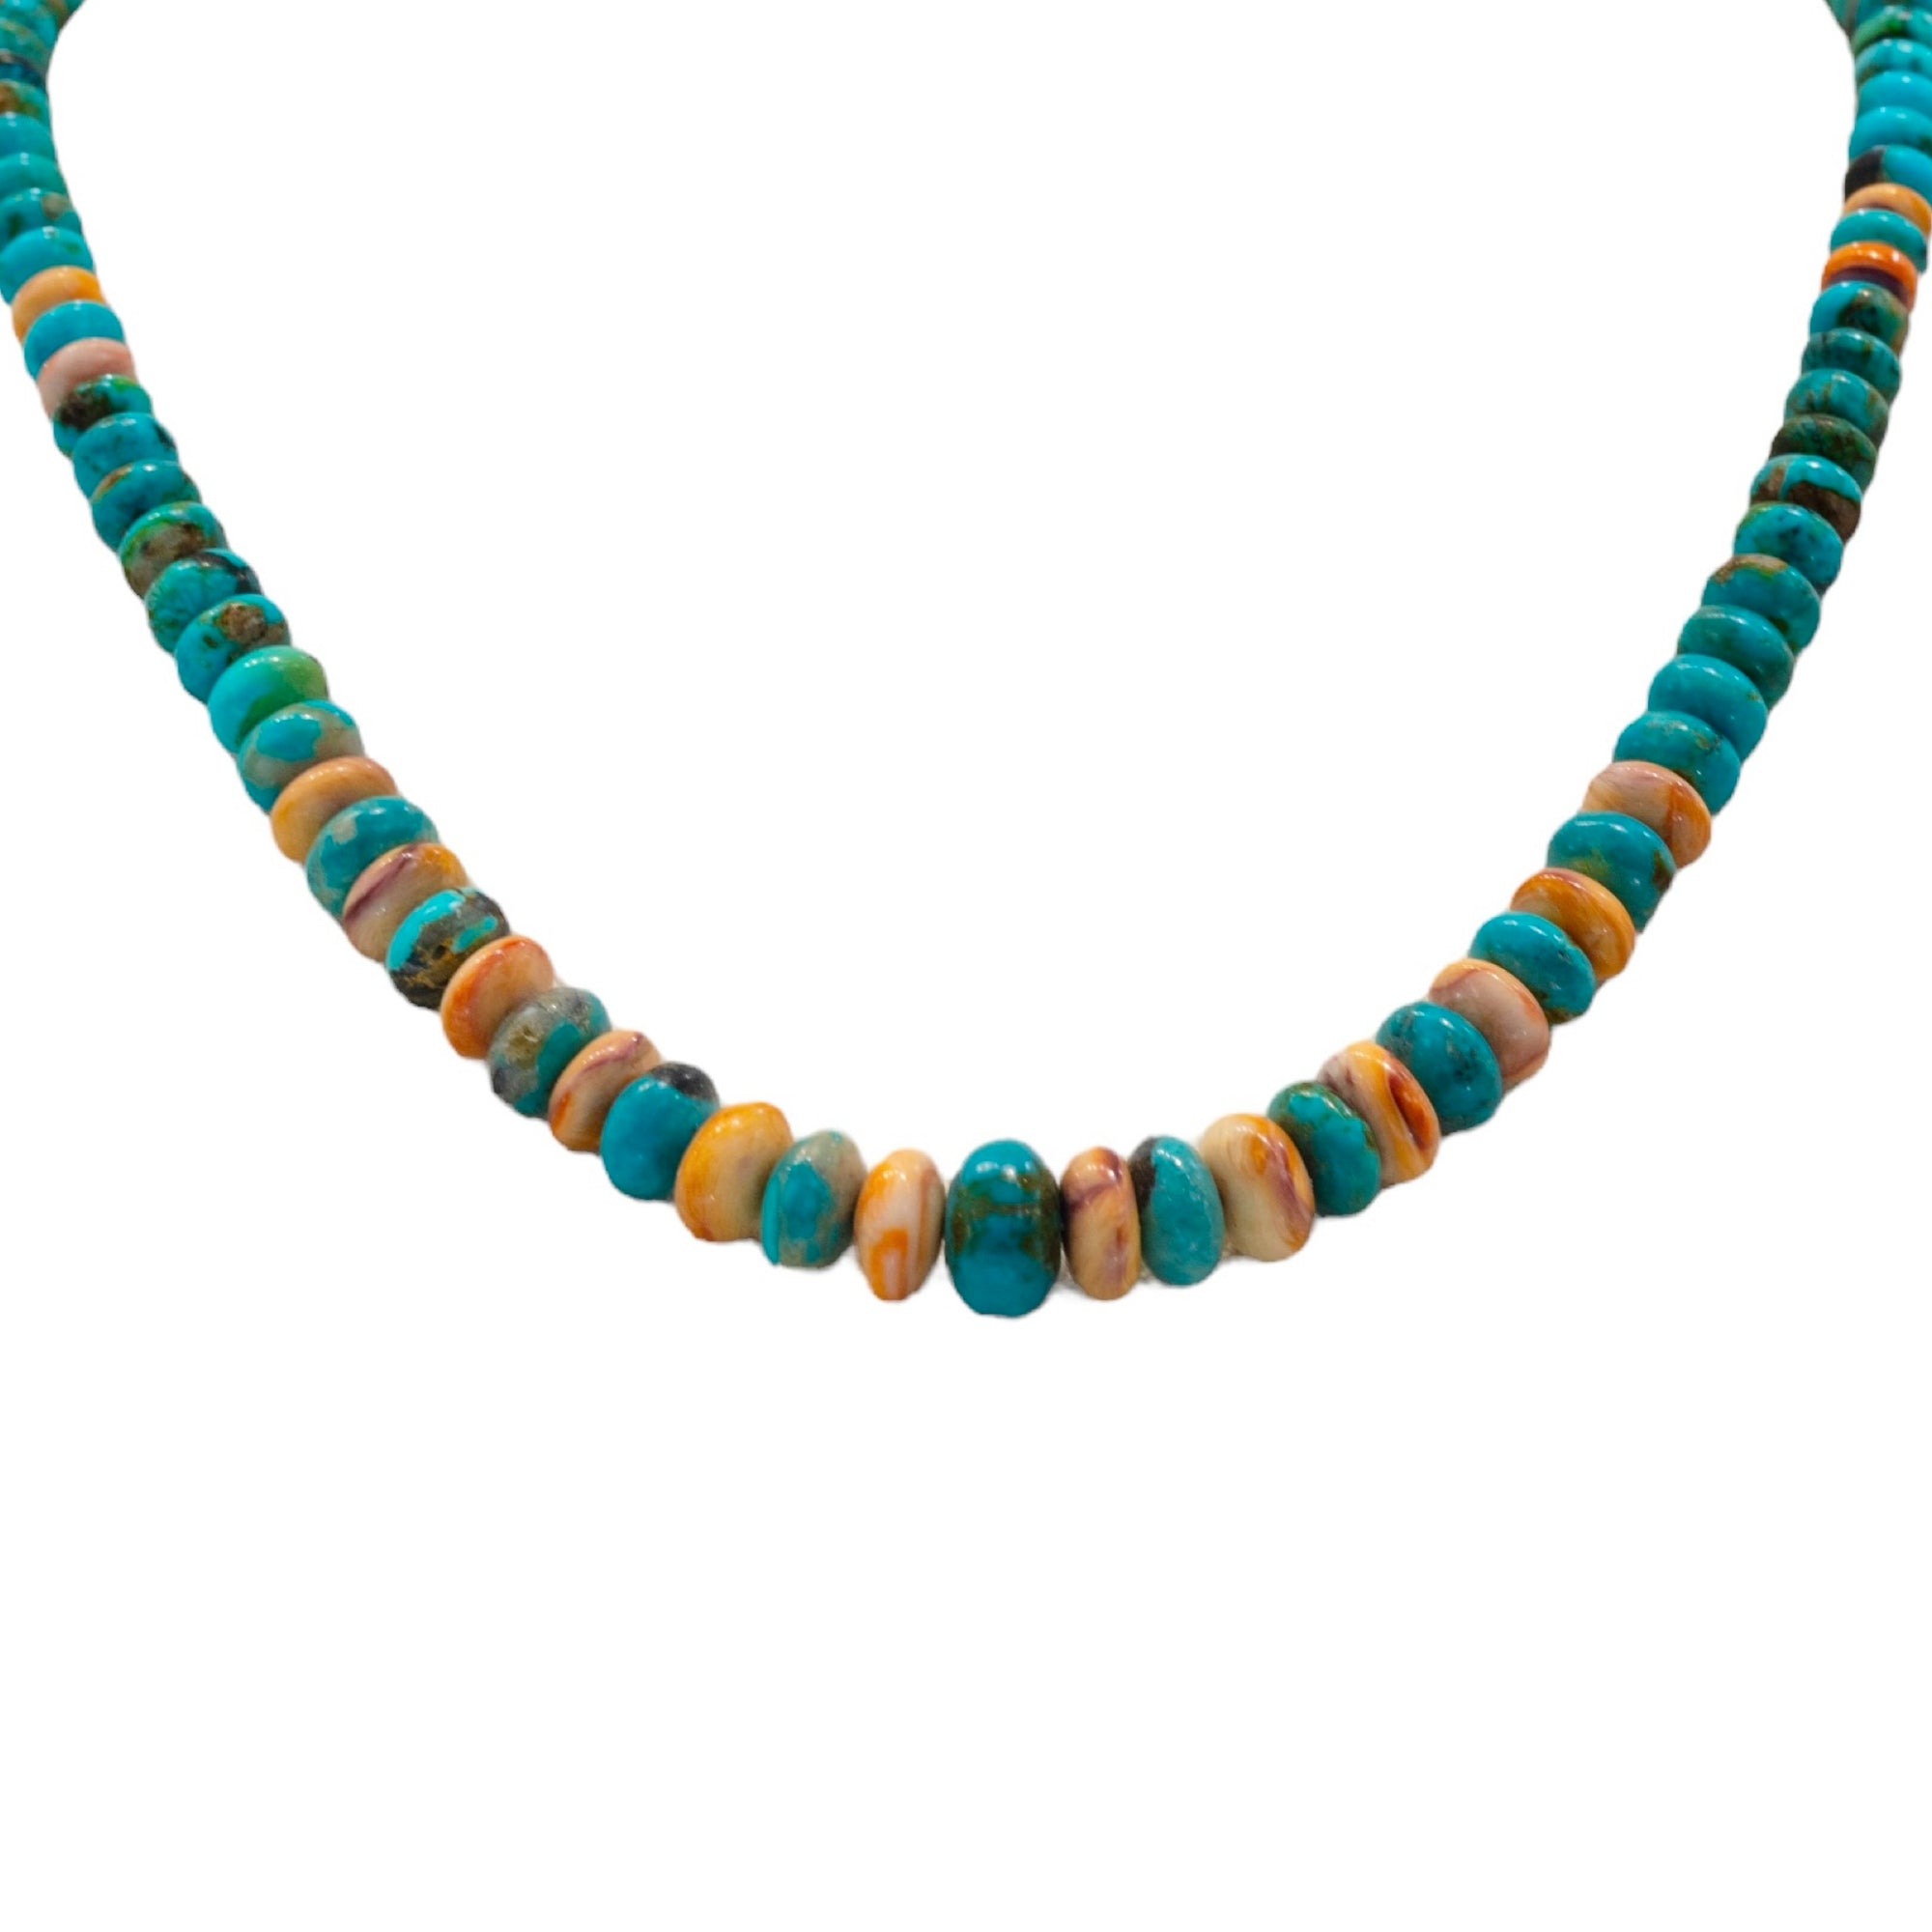 Native American Tibetan Turquoise Necklace available at Talisman Collection Fine Jewelers in El Dorado Hills, CA and online.Stats: A timeless piece: Experience a sense of tradition with this 18" Native American Necklace. Handcrafted with Spiny Oyster shell and Tibetan cut turquoise rondelles, adorned with a signature sterling silver cone clasp. Impeccable quality guaranteed. Story: This jewelry collection is sold to support Mather Vets and America’s Finest